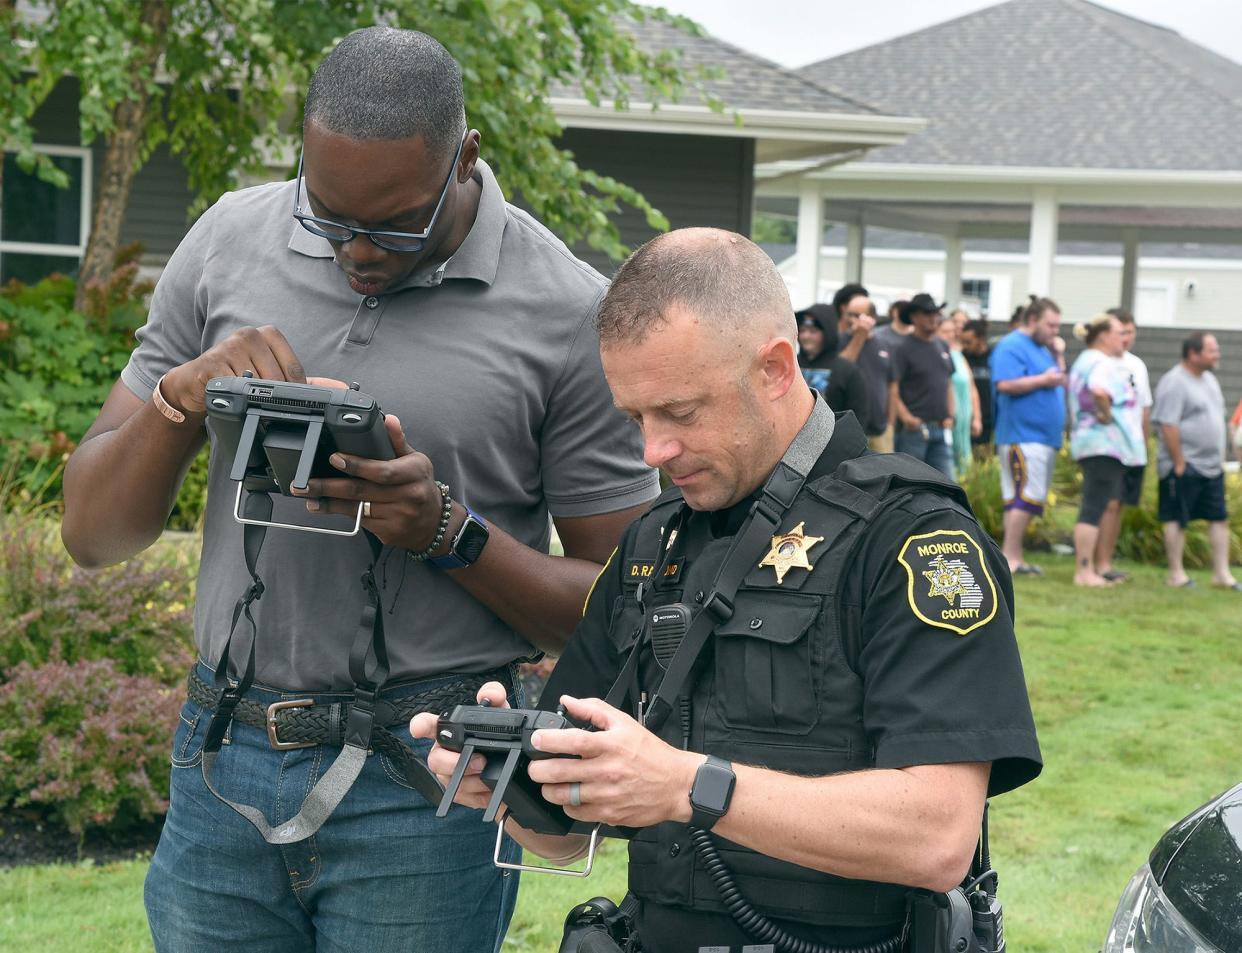 Michigan Lt. Governor Garlin Gilchrist watches live drown images and footage of the storm damage from a tornado that touched down in August at Frenchtown Villa in Monroe County. Controlling the drone was Monroe County Sheriff Capt. Dave Raymond.